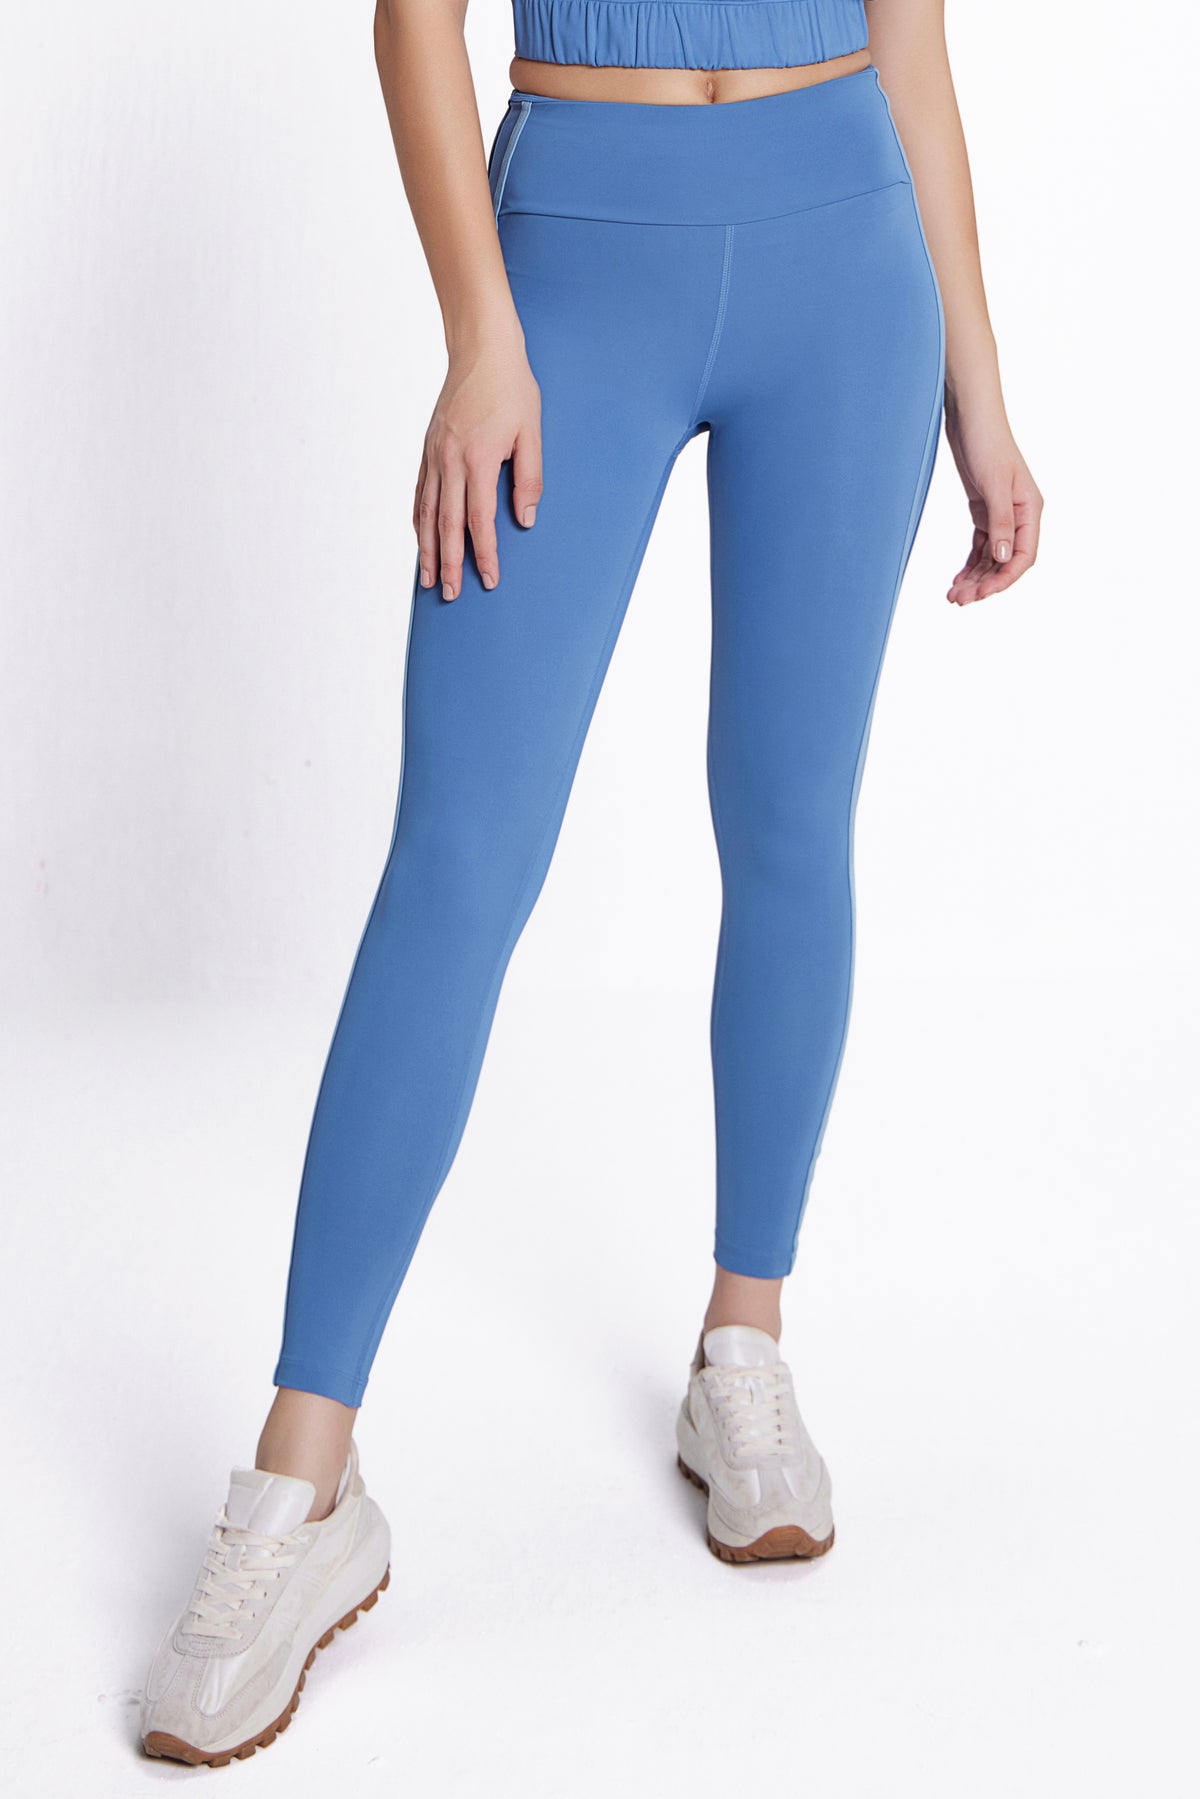 Matchpoint Leggings